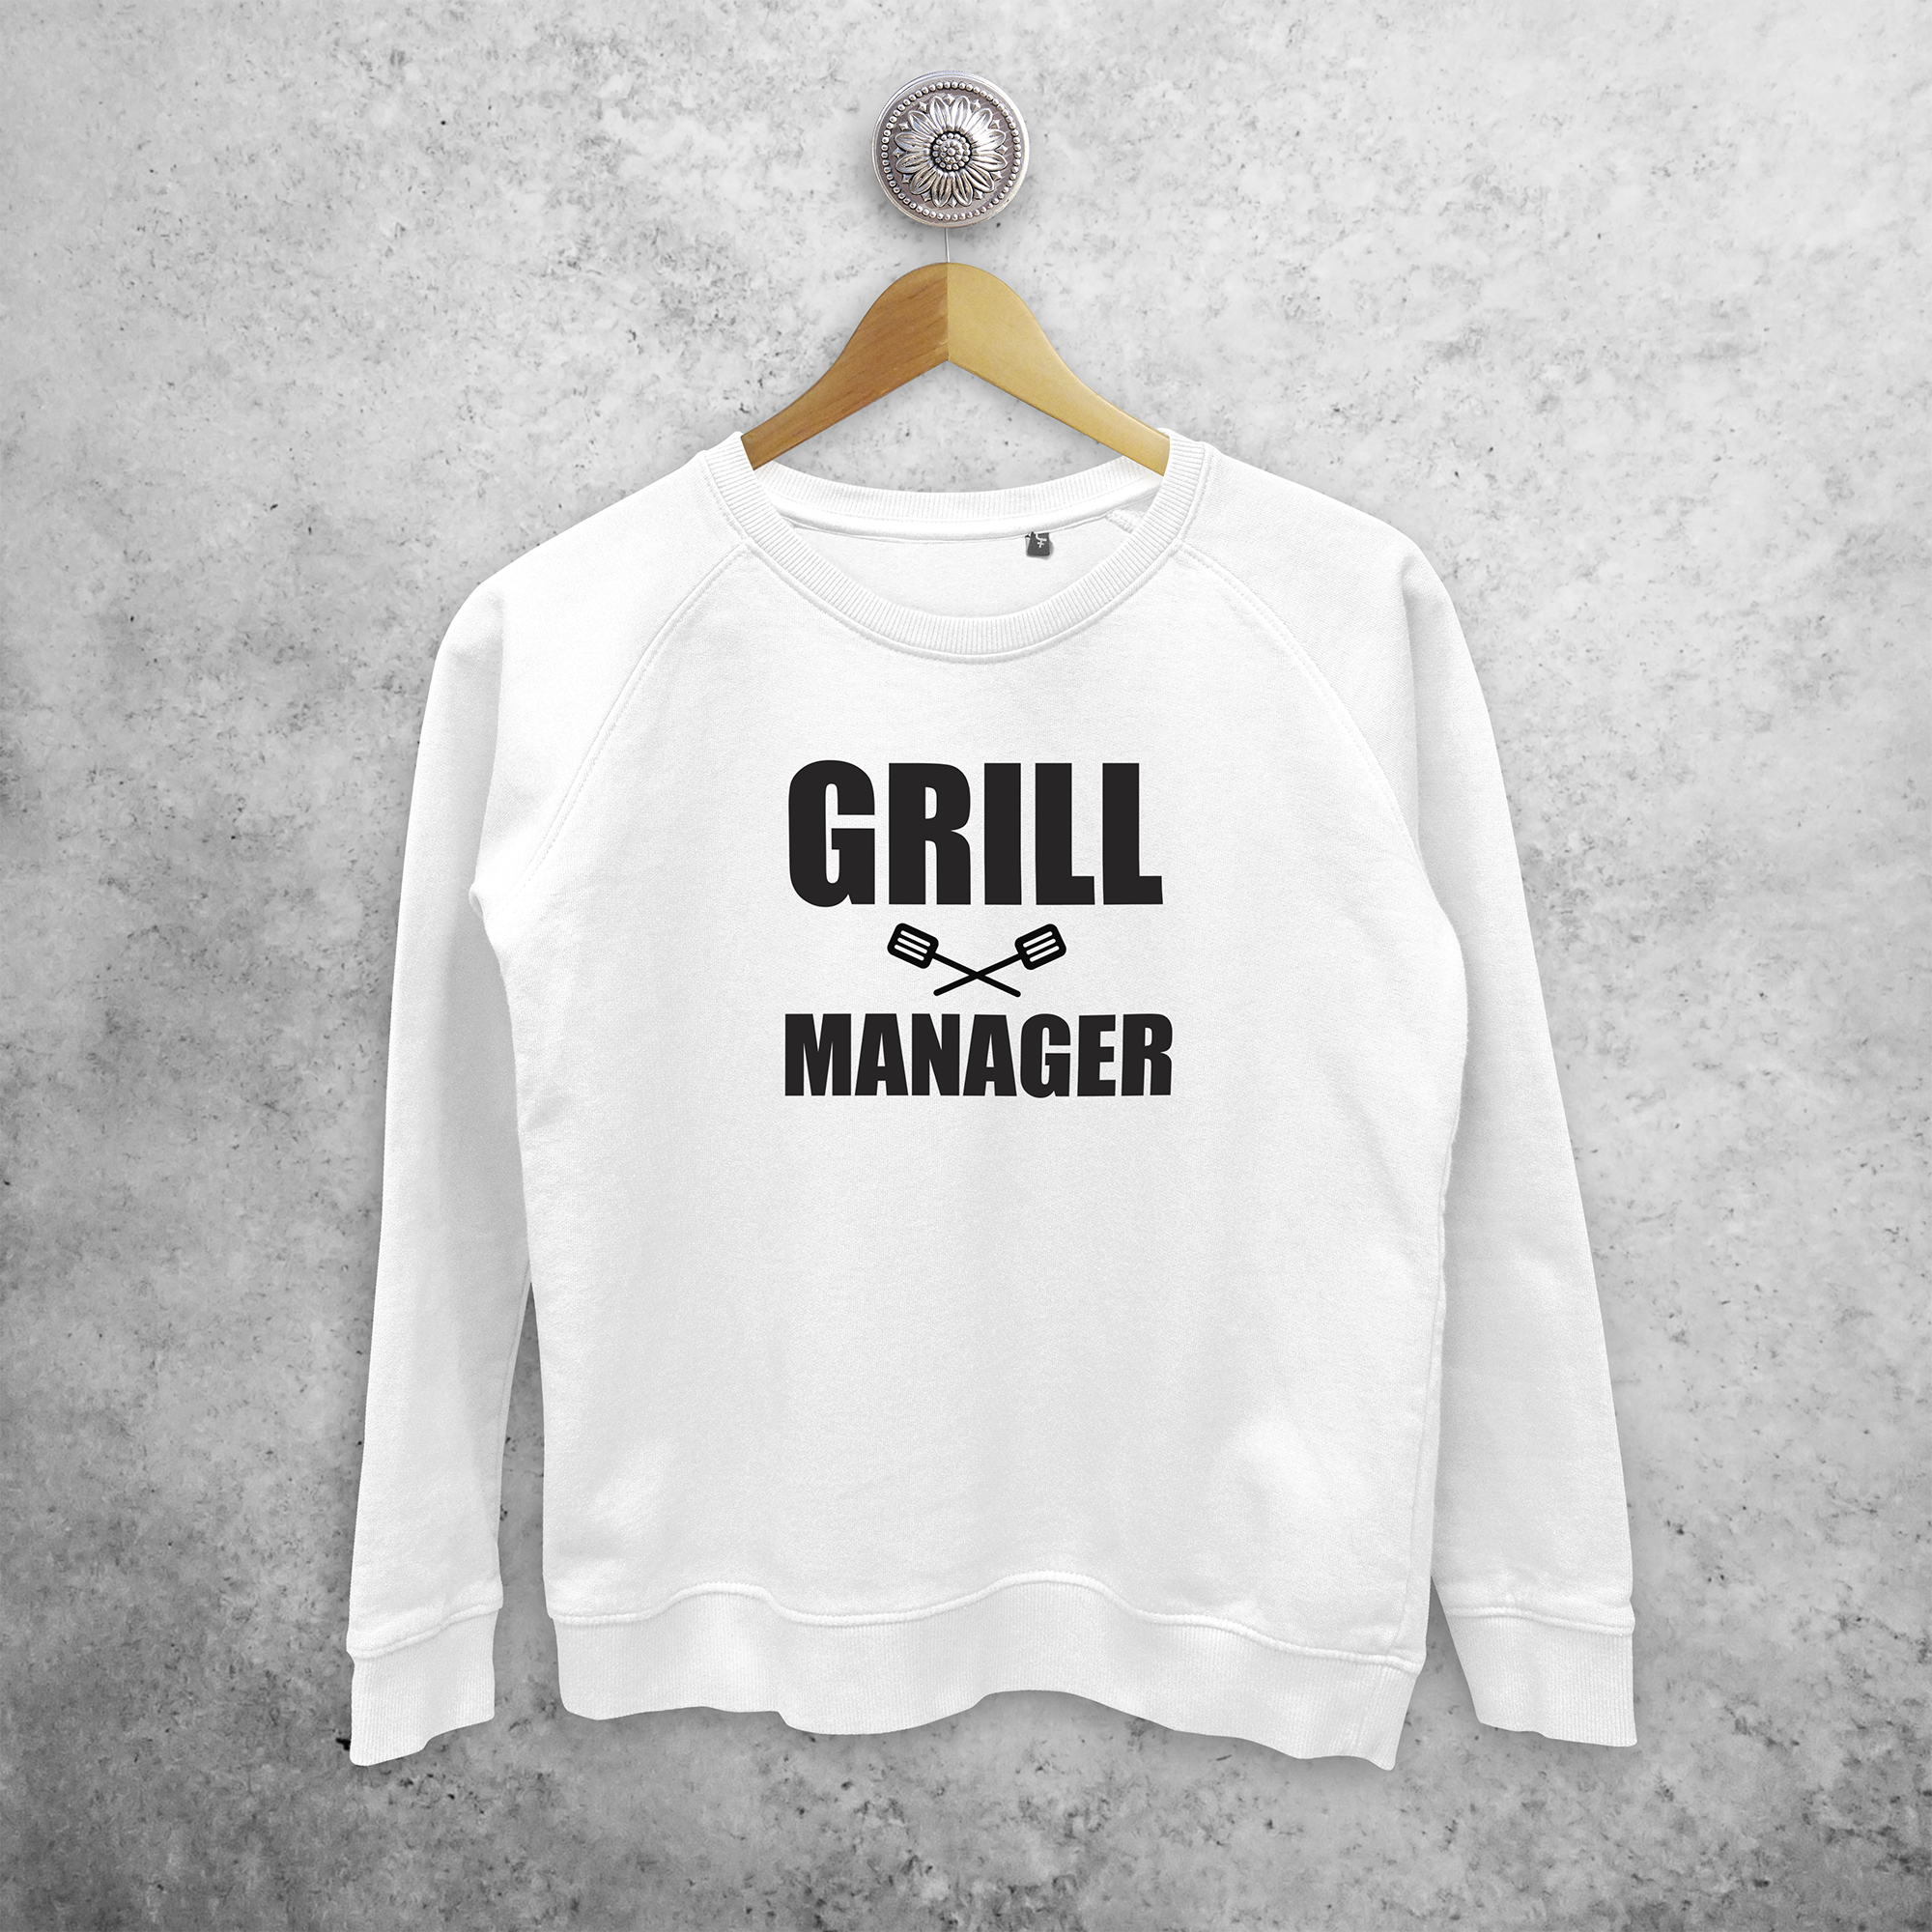 'Grill manager' sweater